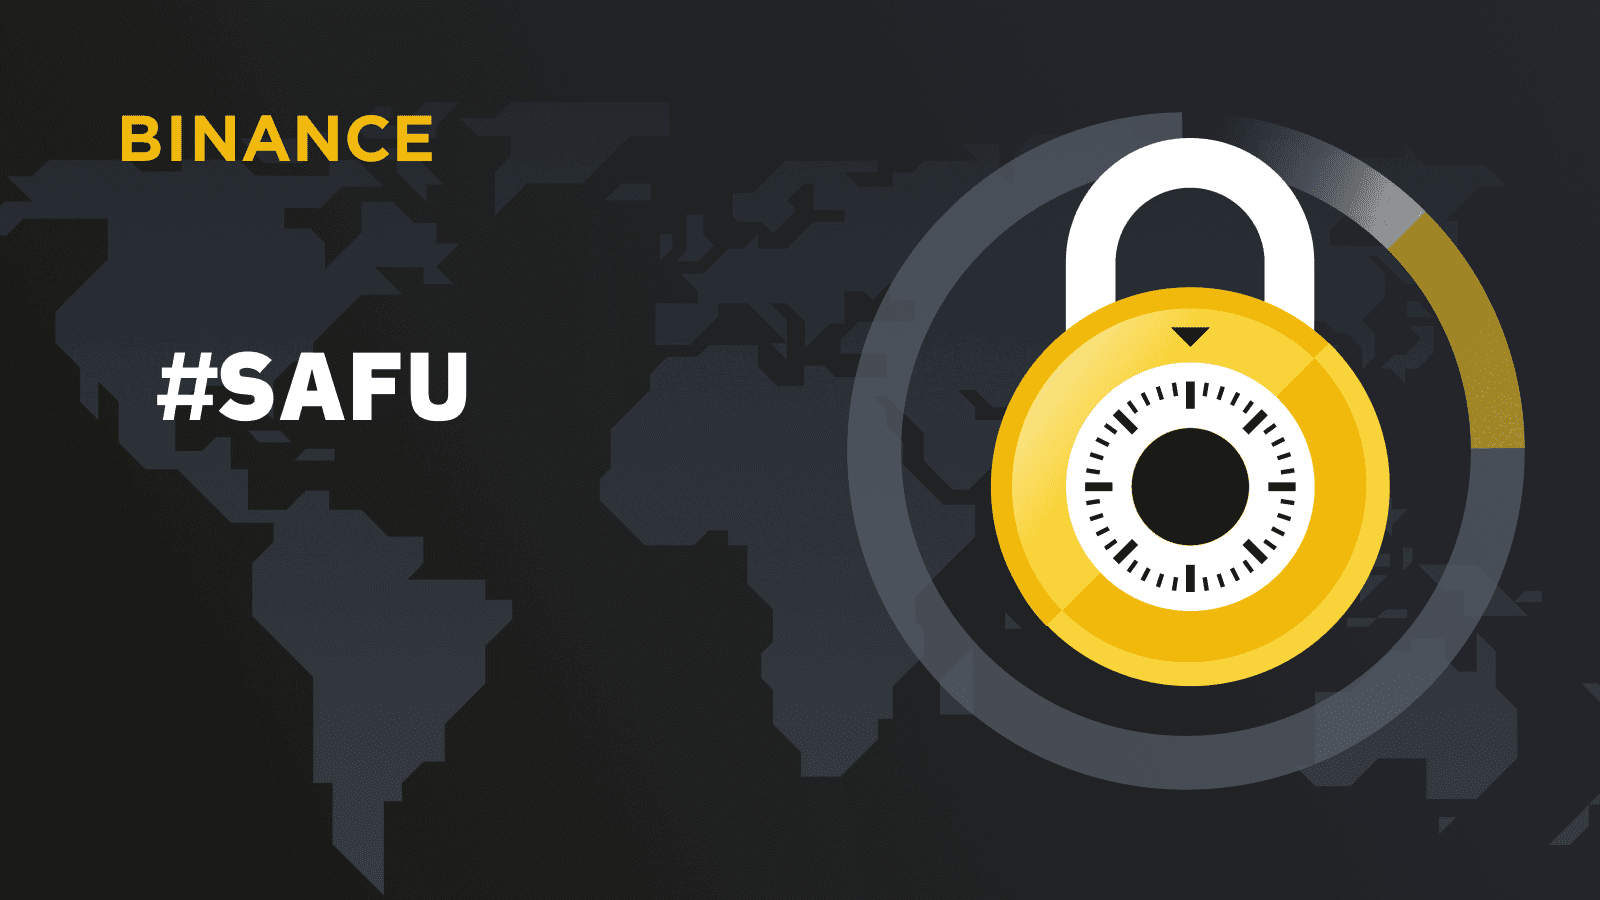 Binance's (SAFU) Secure Asset Fund for Users is now at a $1 Billion valuation